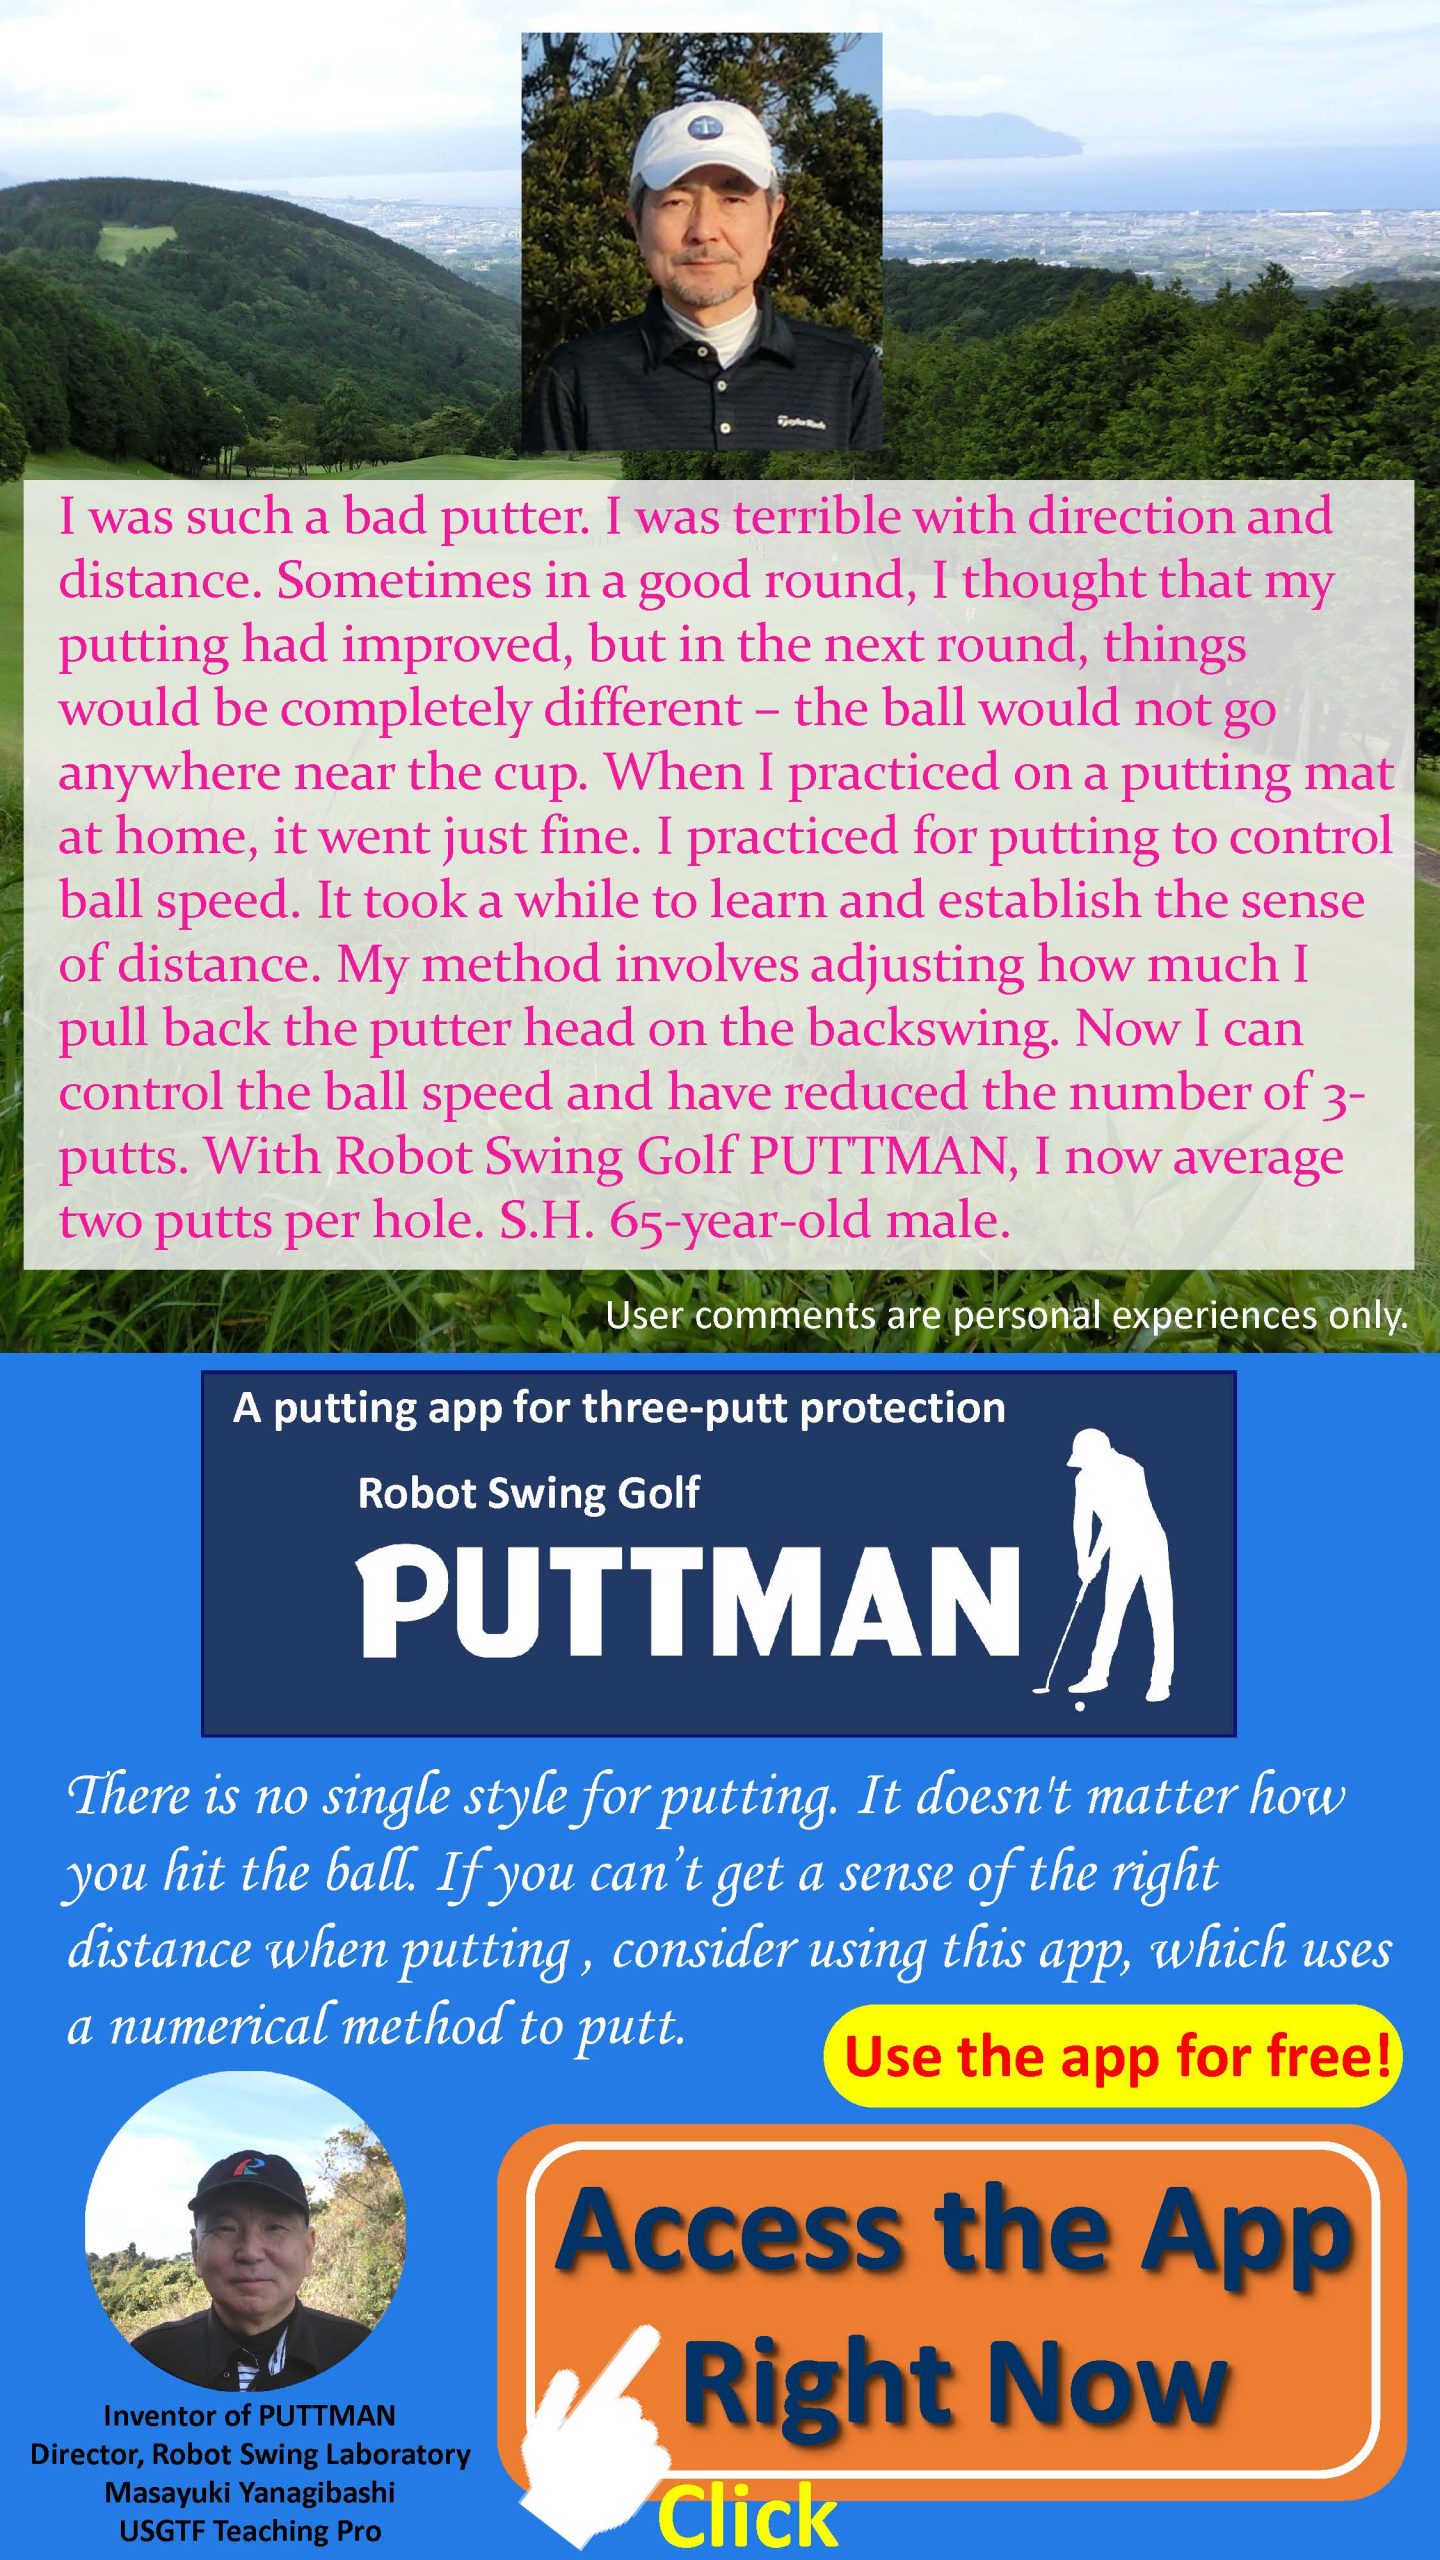 I was such a bad putter. I was terrible with direction and distance. Sometimes in a good round, I thought that my putting had improved, but in the next round, things would be completely different ? the ball would not go anywhere near the cup. When I practiced on a putting mat at home, it went just fine. I practiced  for putting to control ball speed. It took a while to learn and establish the sense of distance. My method involves adjusting how much I pull back the putter head on the backswing. Now I can control the ball speed and have reduced the number of 3-putts. With Robot Swing Golf PUTTMAN, I now average two putts per hole. S.H. 65-year-old male. There is no single style for putting. It doesn't matter how you hit the ball. If you can’t get a sense of the right distance when putting , consider using this app, which uses a numerical method to putt.